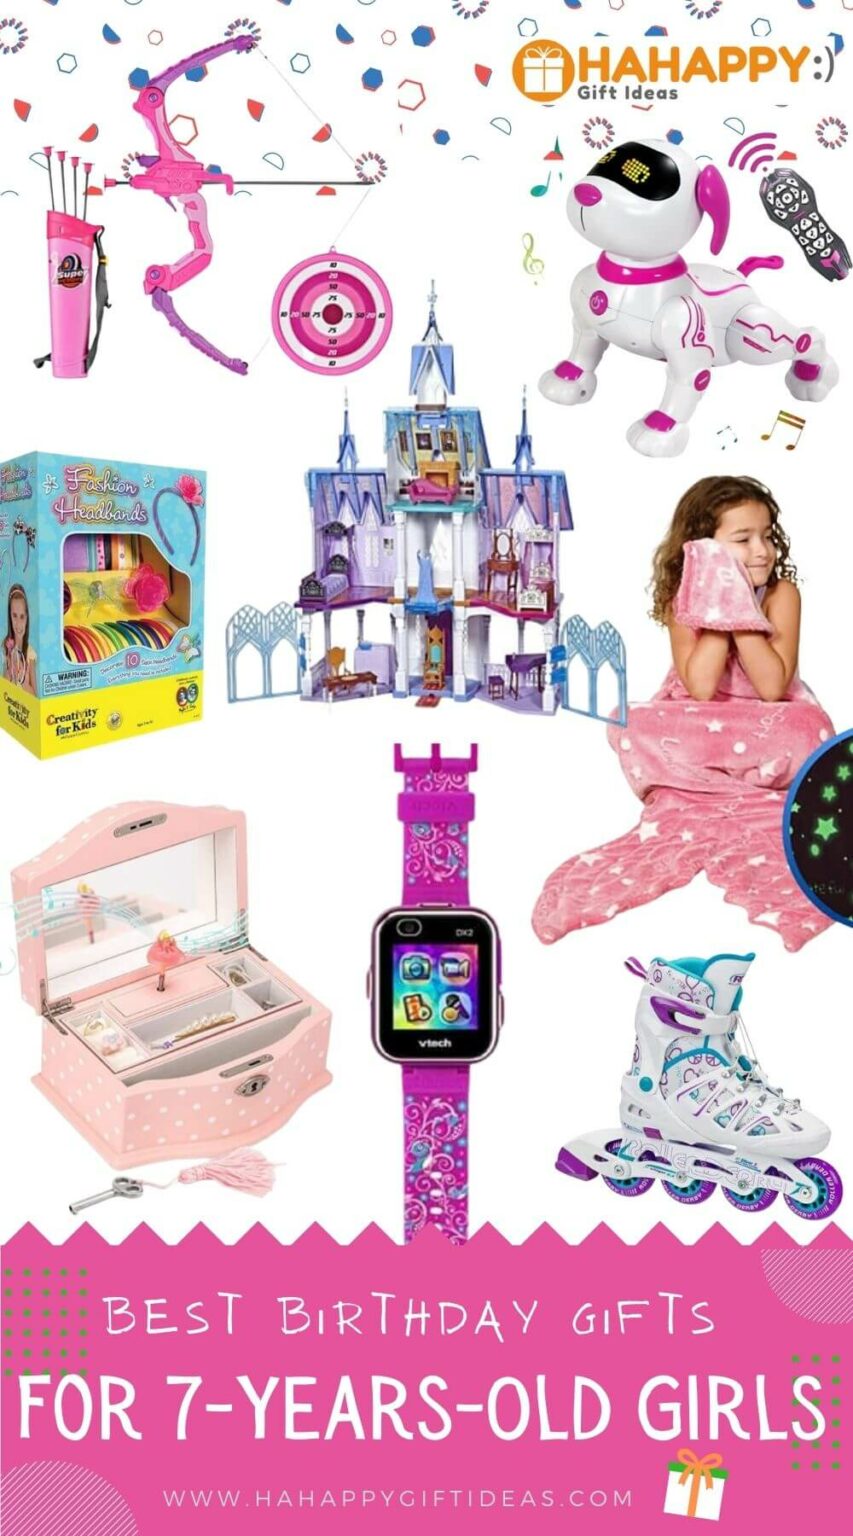 Best Gifts For A 7YearOld Girl Fun & Adorable That She'll LOVE